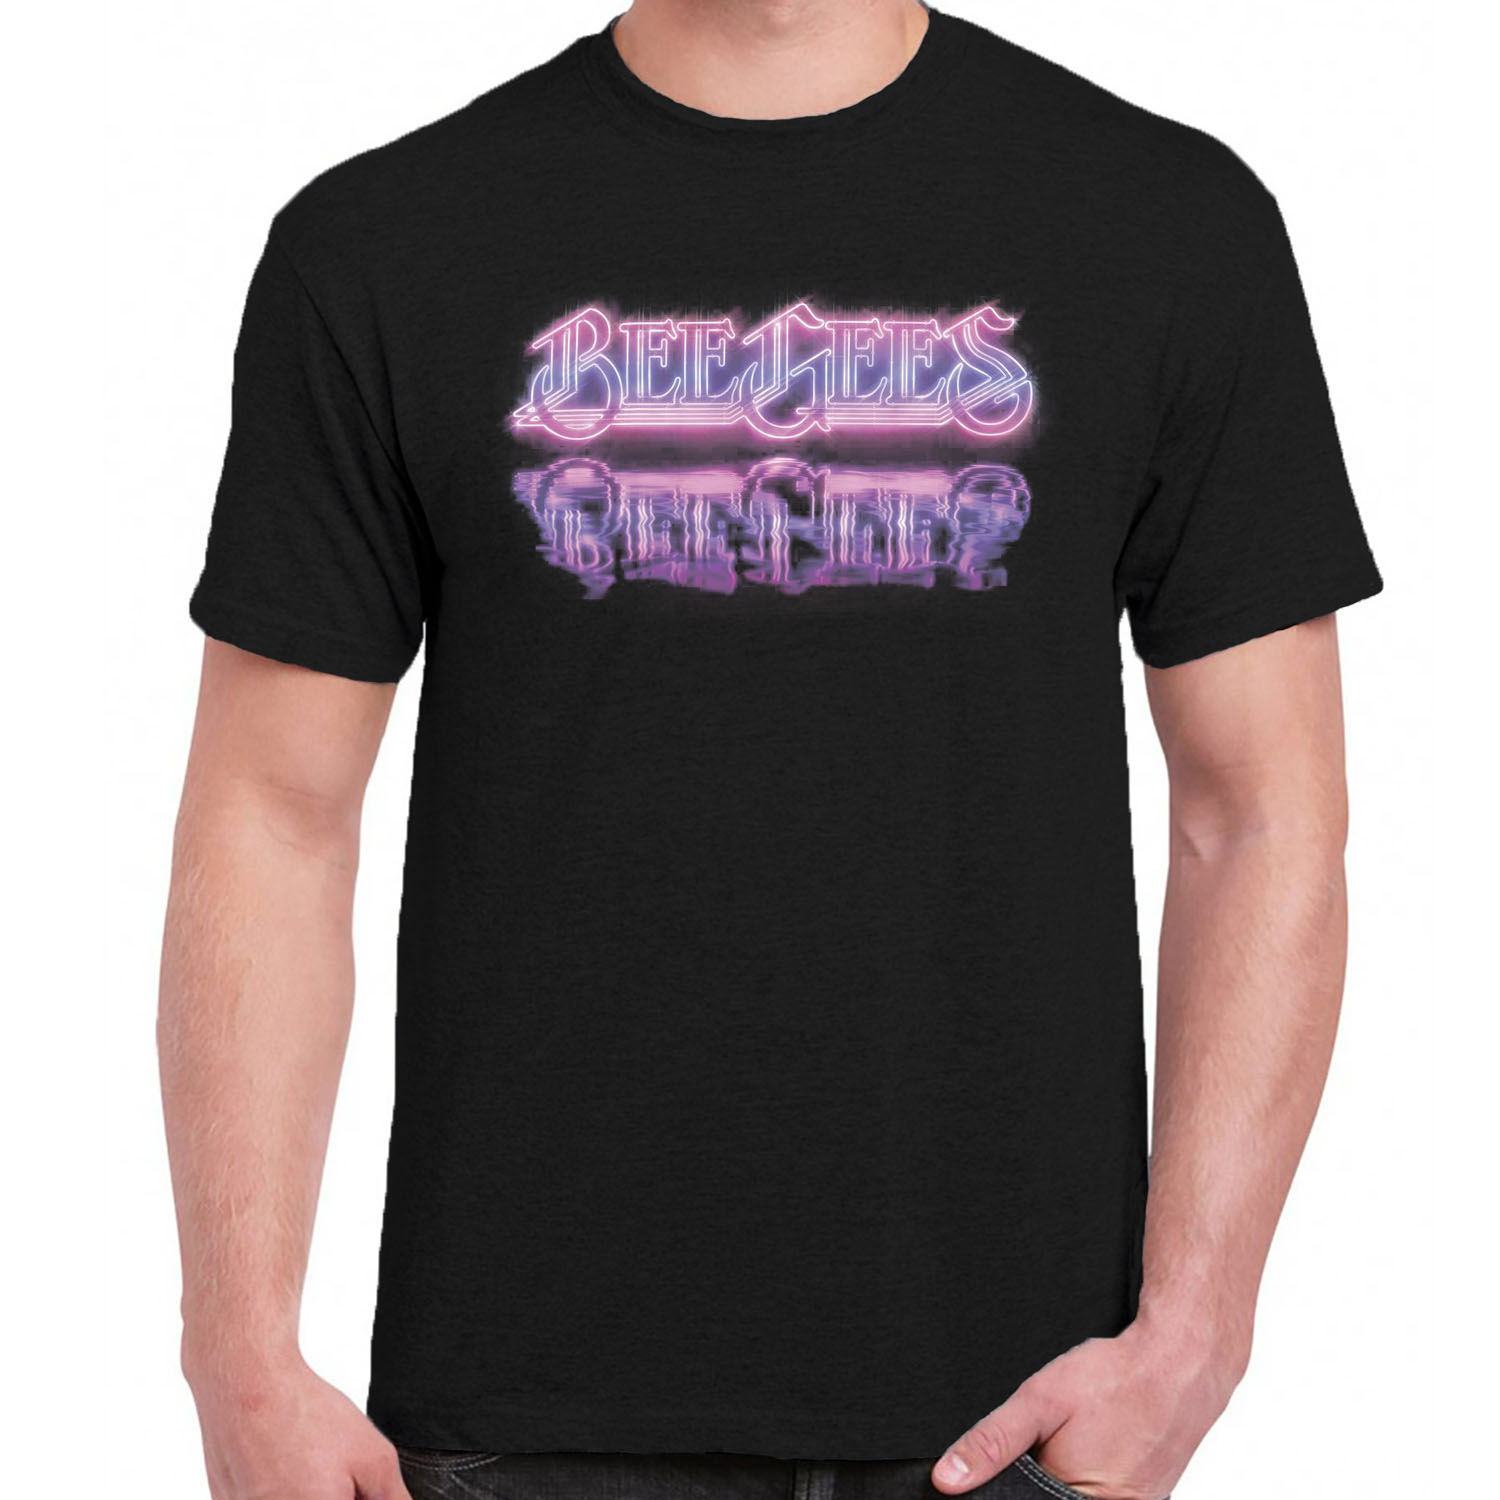 Bee Gees t-shirt logo The -